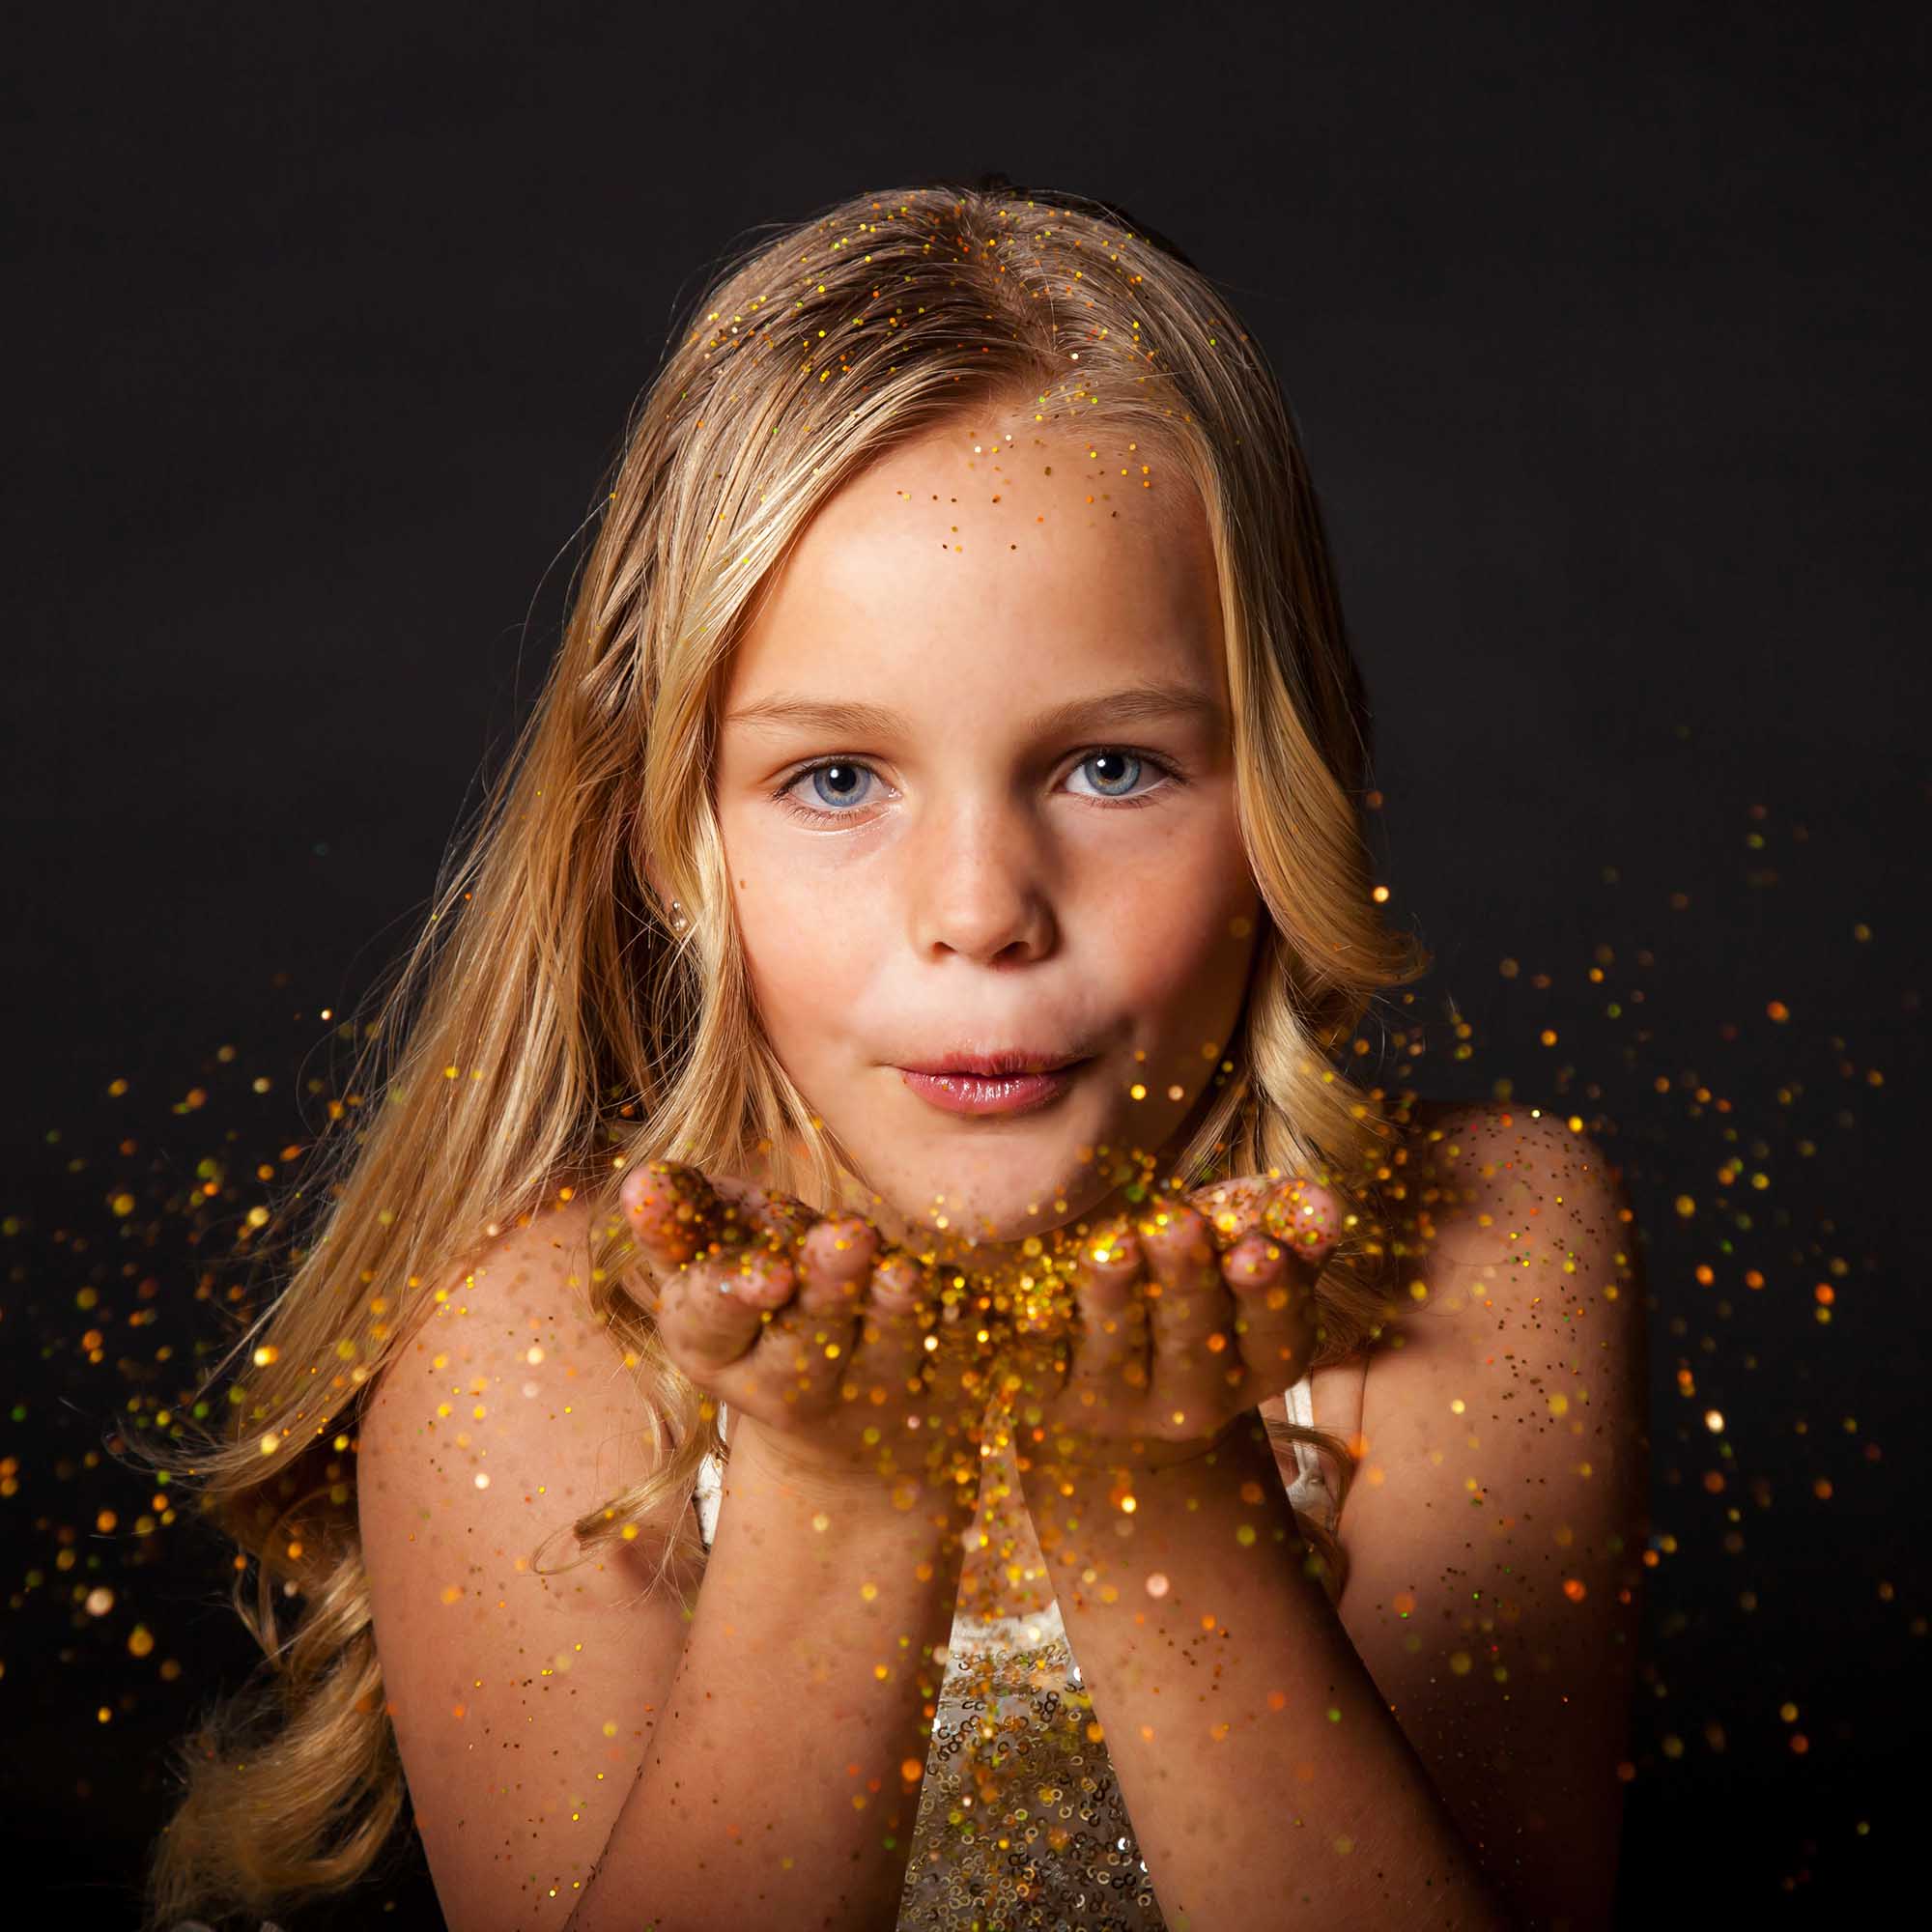 Glitter Session | Fine Art Child photographer in Sussex, Surrey, East